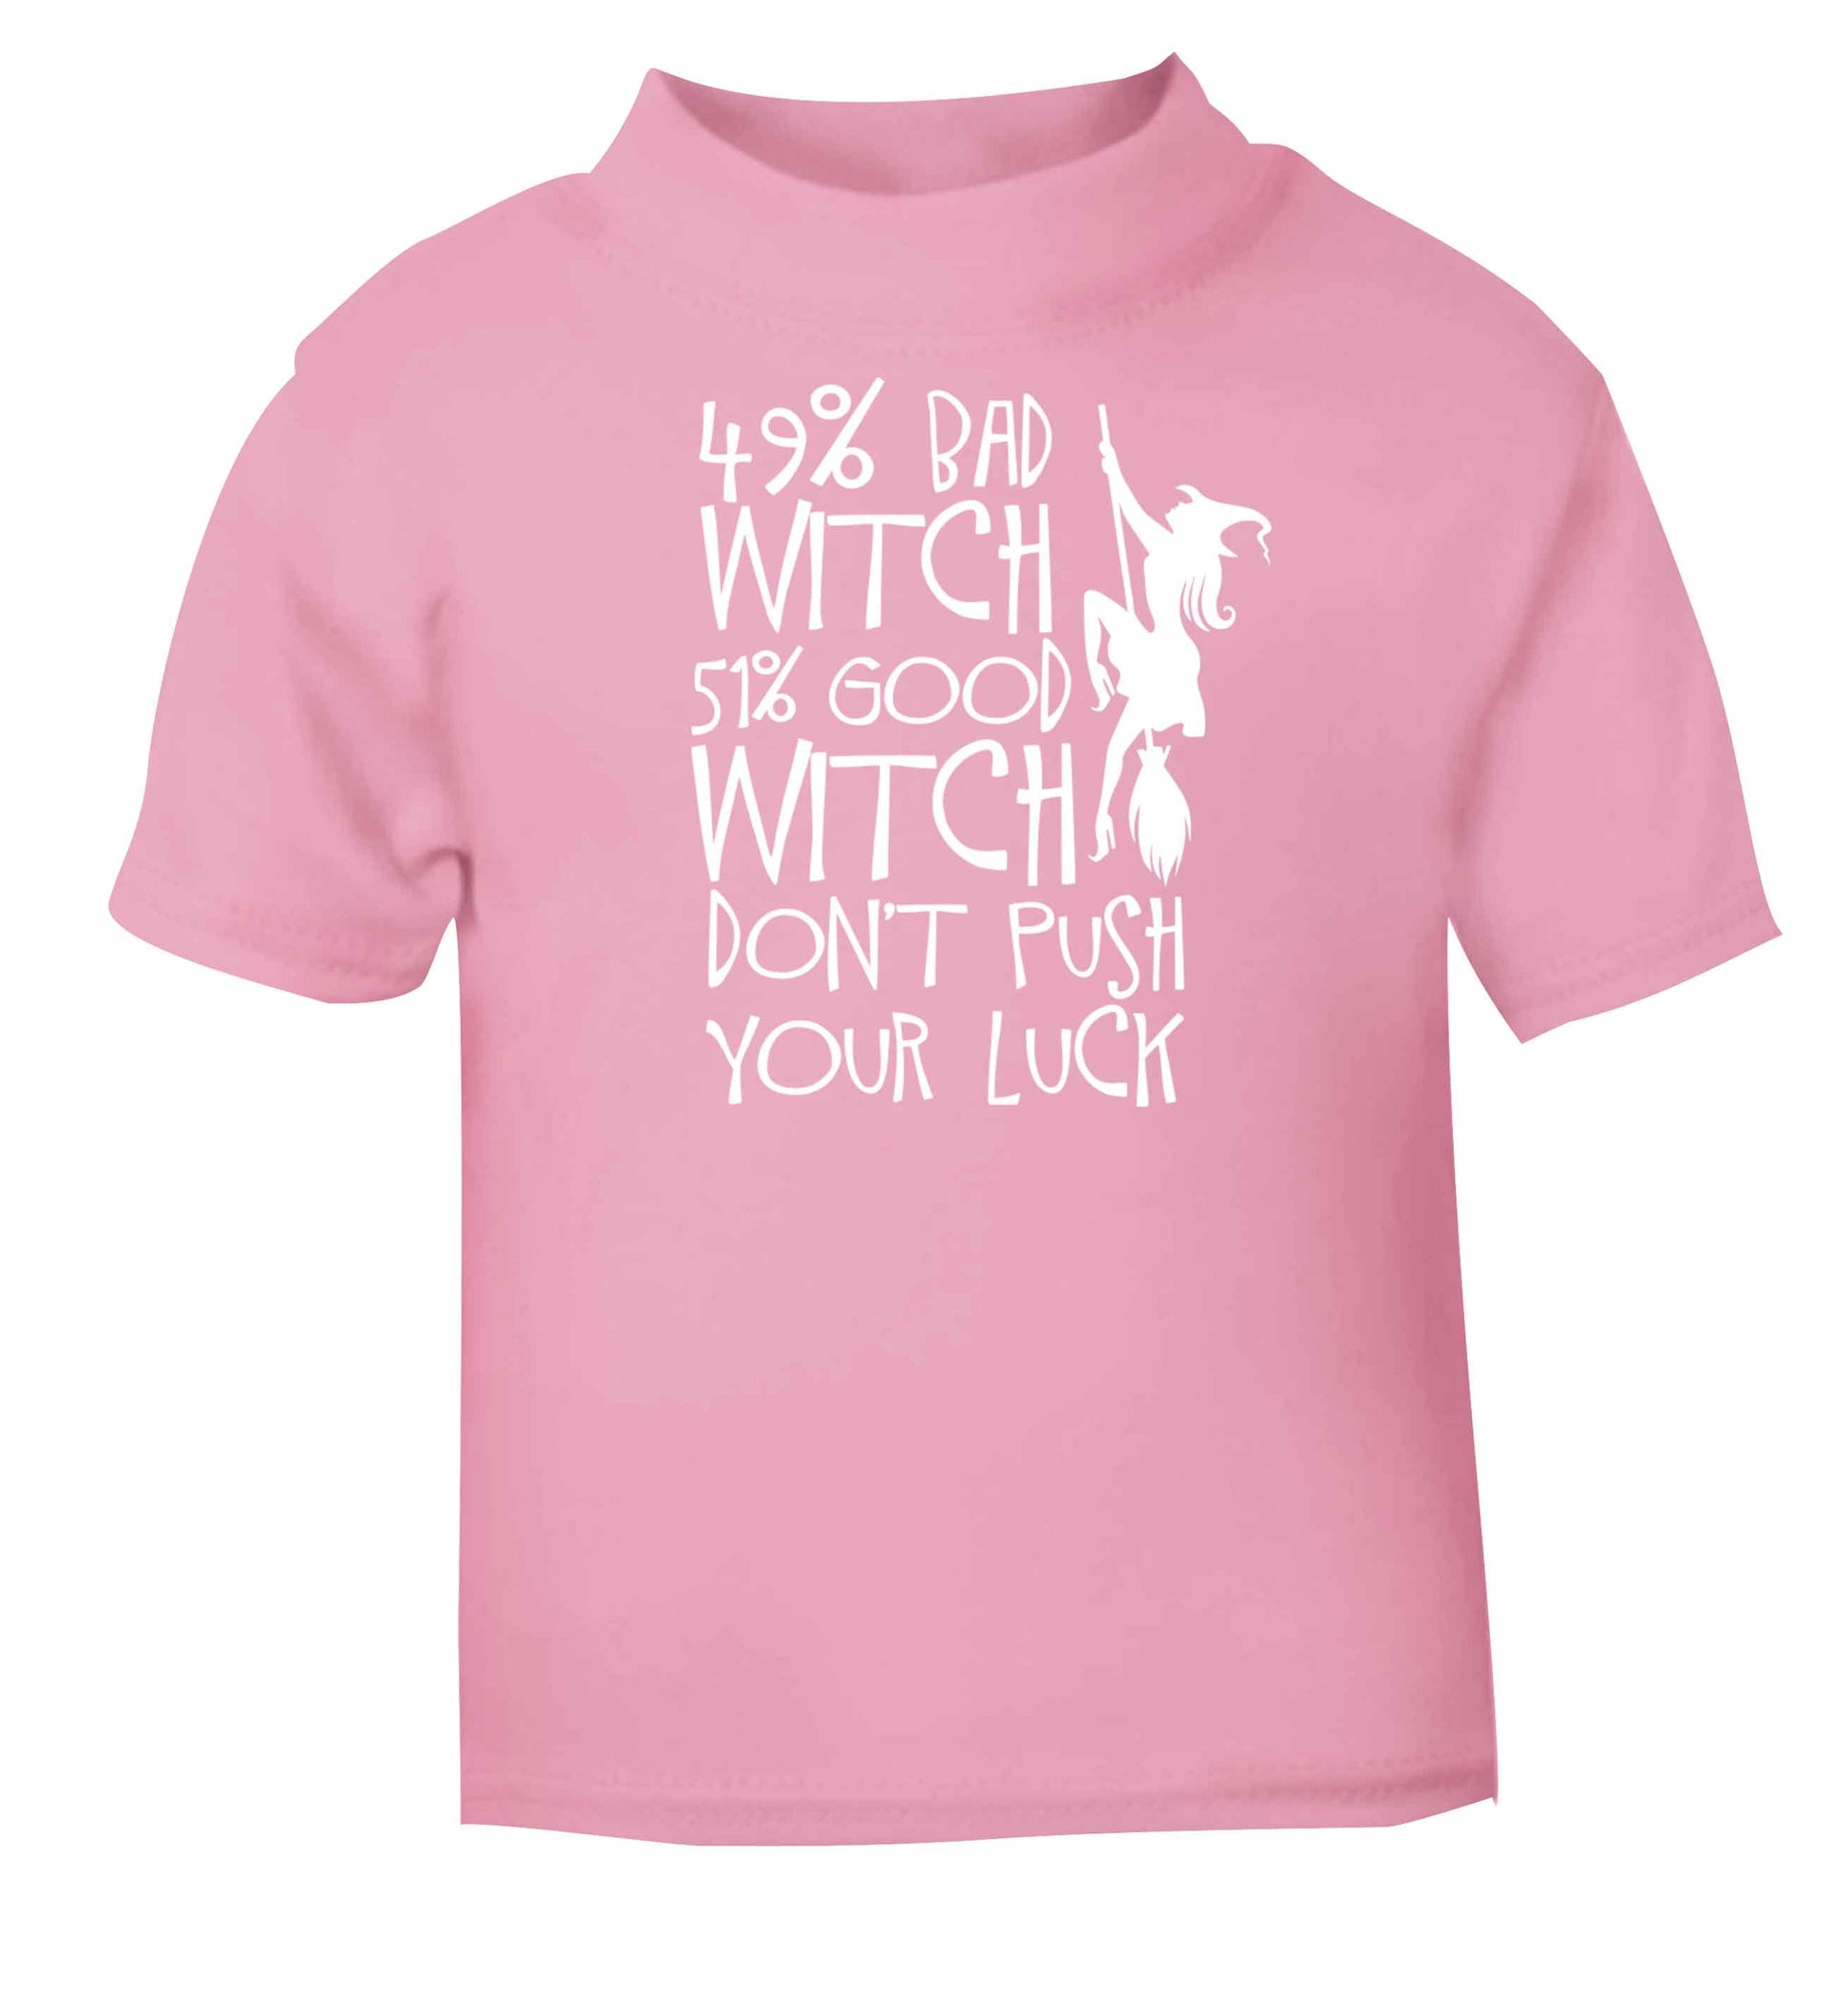 49% bad witch 51% good witch don't push your luck light pink baby toddler Tshirt 2 Years